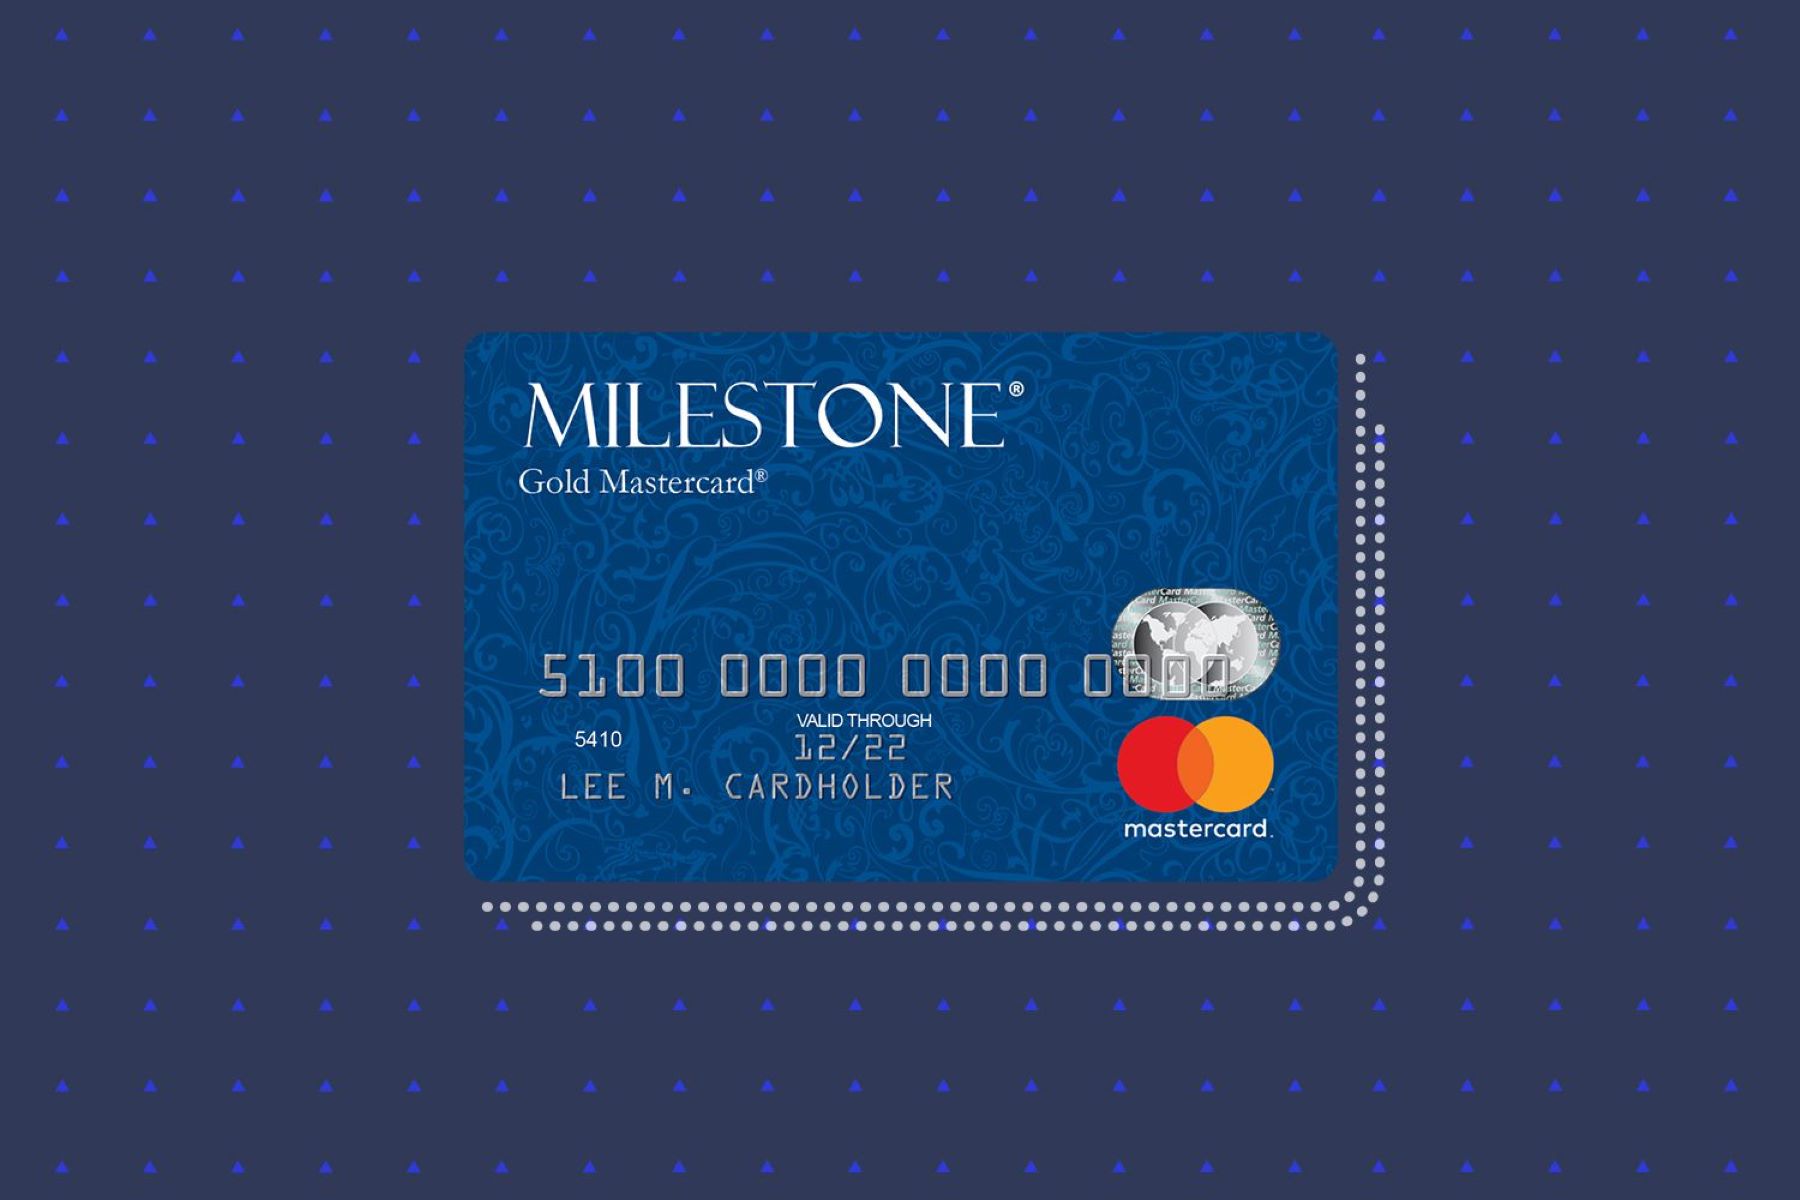 How To Pay Milestone Credit Card